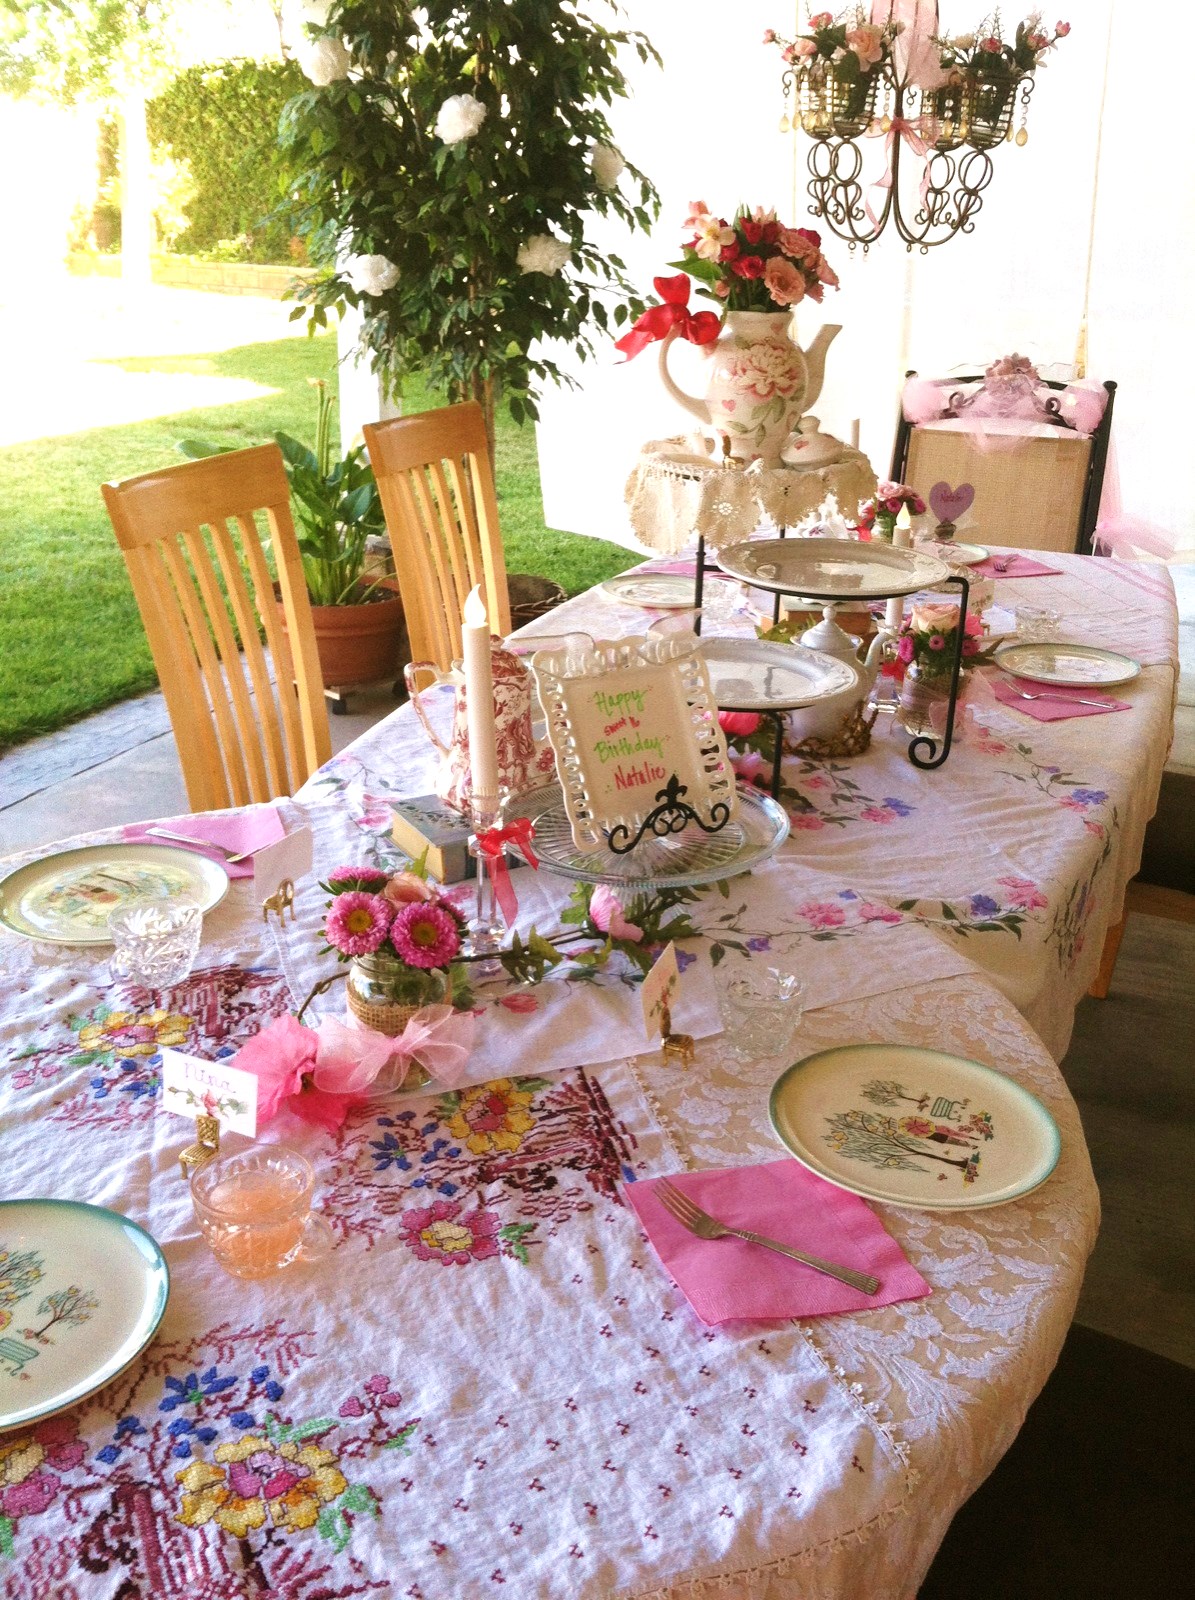 A glimmer of Heaven: A Very "Sweet 16" Birthday Tea Party